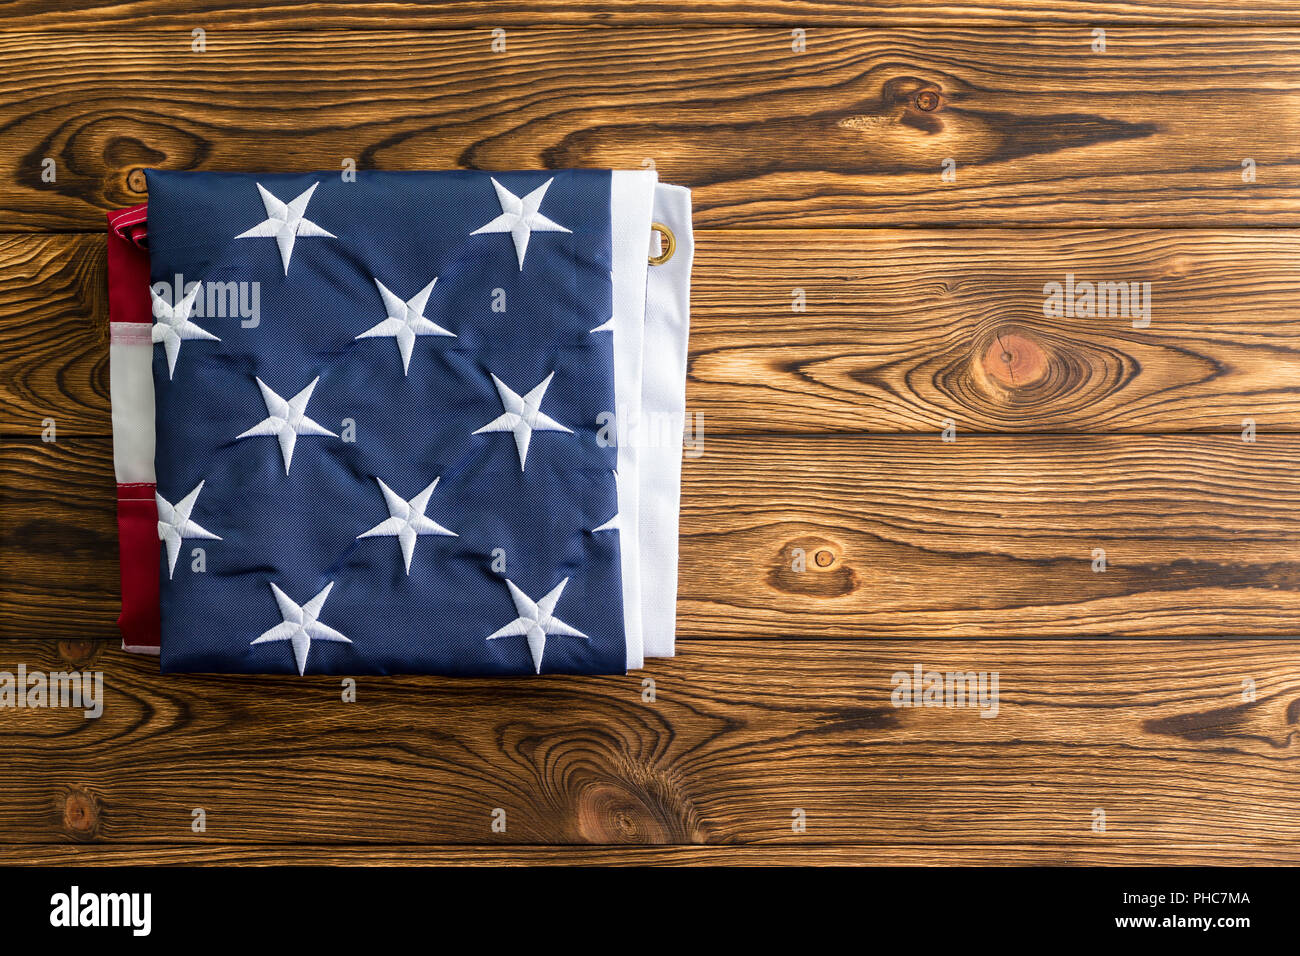 Neatly folded American flag showing the stars representing the original 13 colonies on a wooden table viewed from overhead with copy space Stock Photo